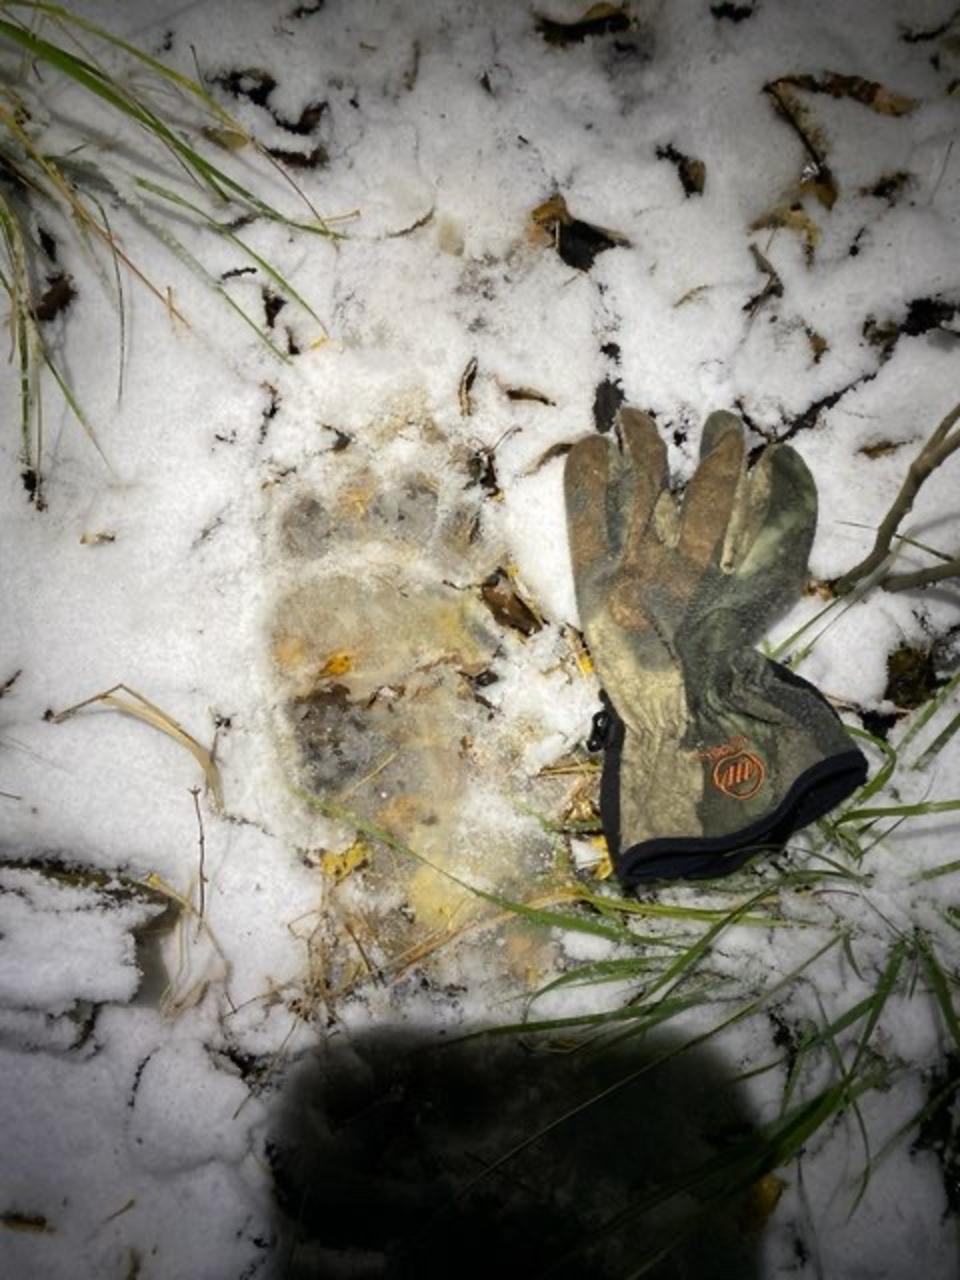 Bow hunter Dash Rodman took this photo of a  bear paw print after he saw the bruin wander near his perch in a tree.